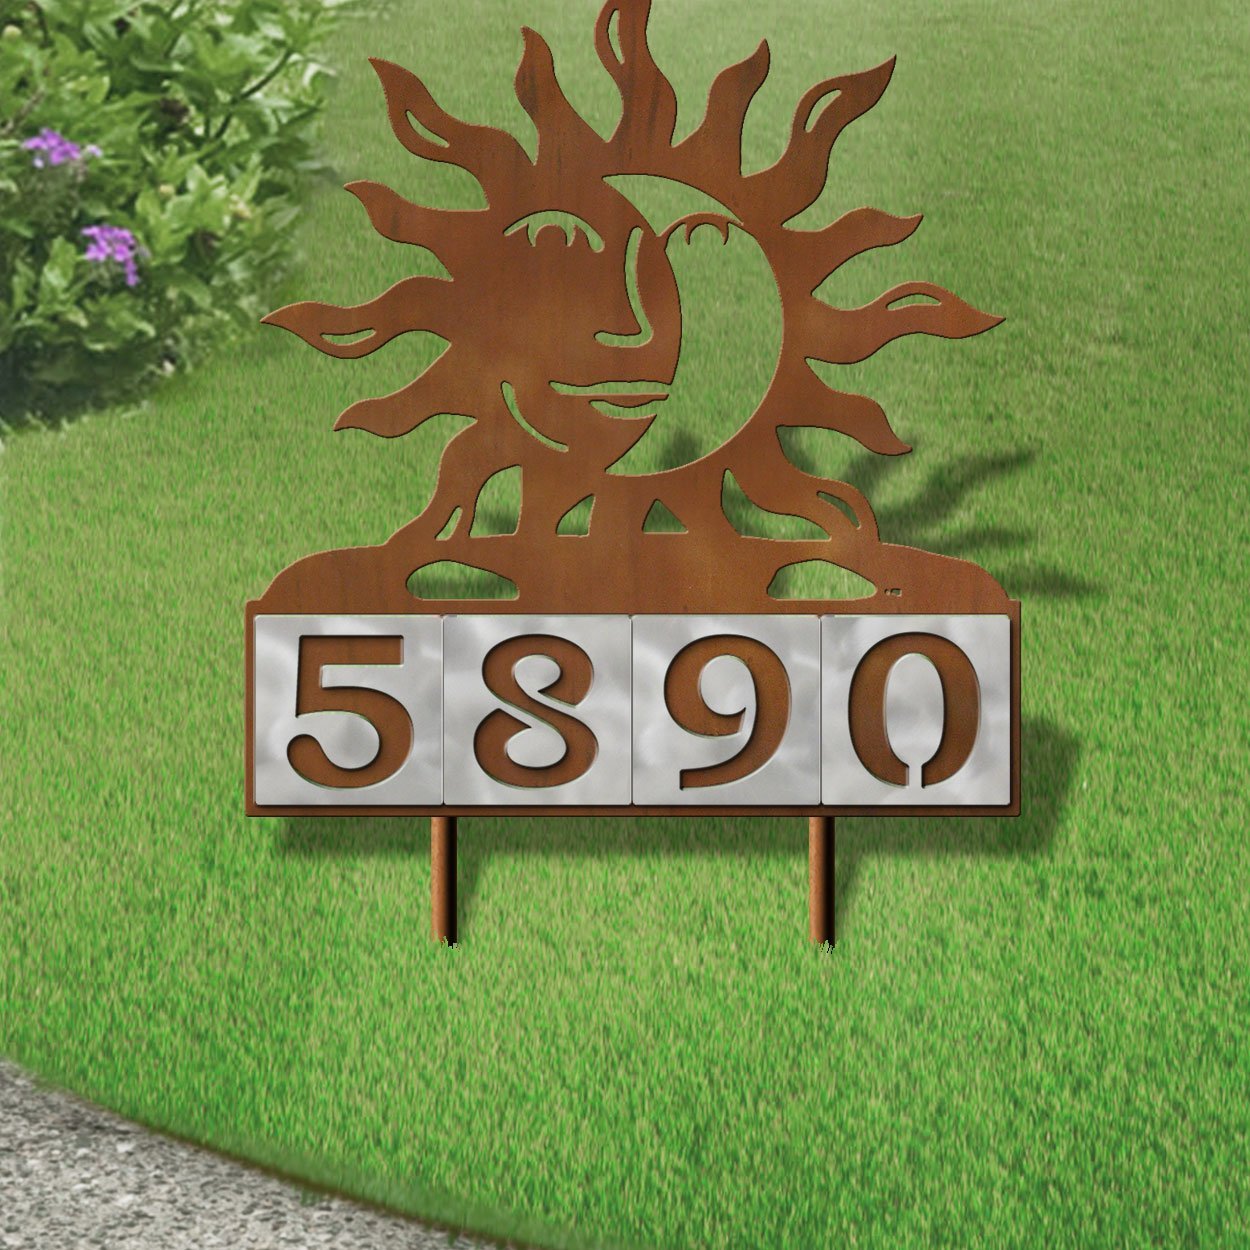 610244 - Happy Sun-Moon Design 4-Digit Horizontal 6-inch Tile Outdoor House Numbers Yard Sign